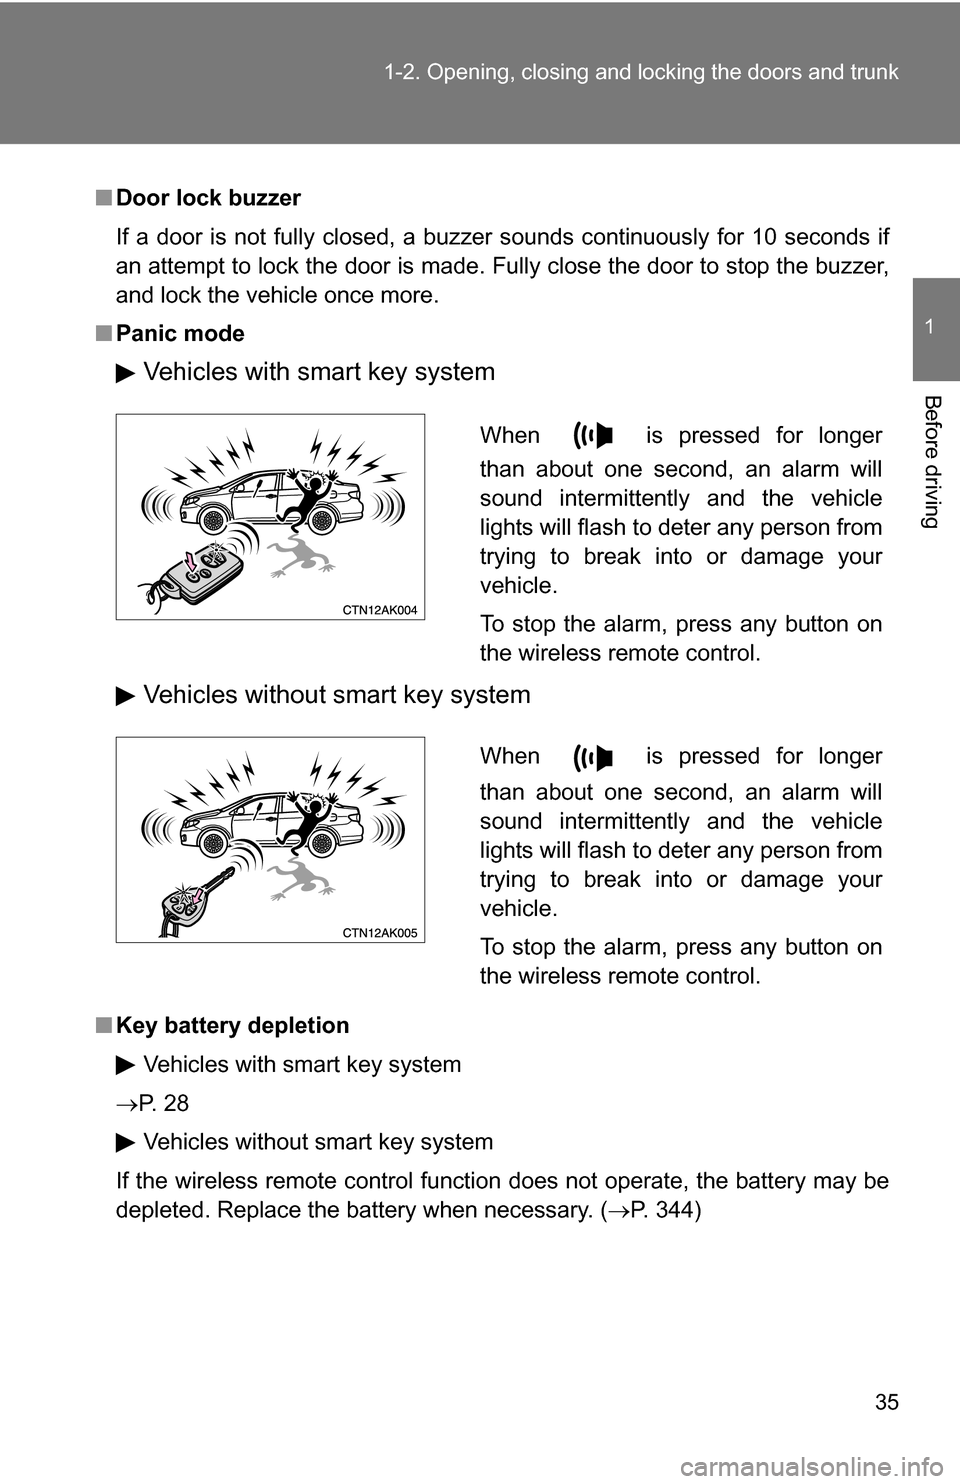 TOYOTA COROLLA 2009 10.G Owners Manual 35
1-2. Opening, closing and locking the doors and trunk
1
Before driving
■
Door lock buzzer
If a door is not fully closed, a buzzer sounds continuously for 10 seconds if
an attempt to lock the door